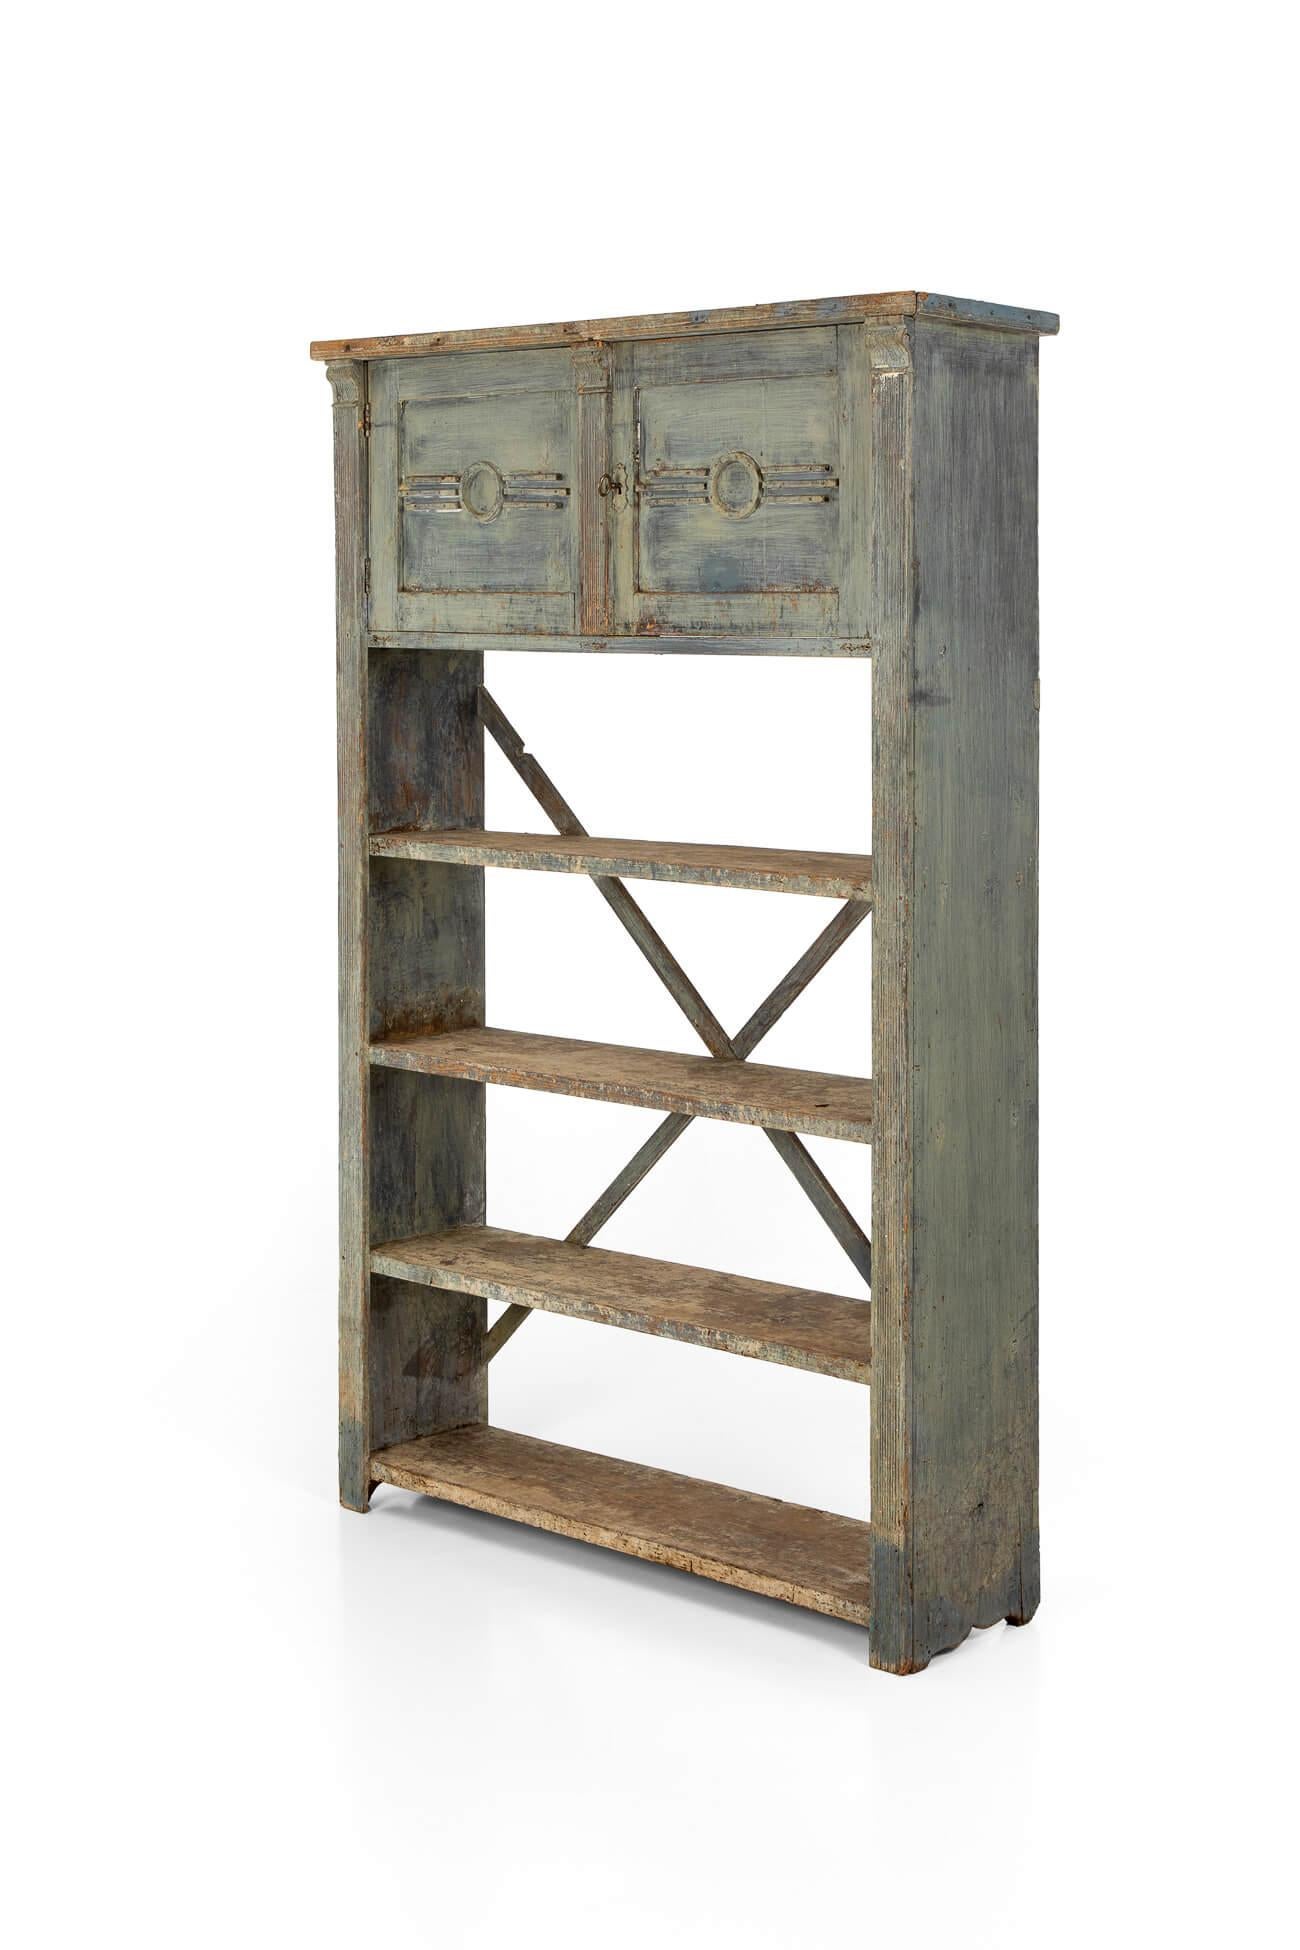 A delightful rustic Spanish bookcase in pine, with four wide shelves and two spacious cupboards to the top.

The shelves are united to the rear by a pair of x-shaped stretchers, with abstract moldings complementing both cupboard doors.

In its